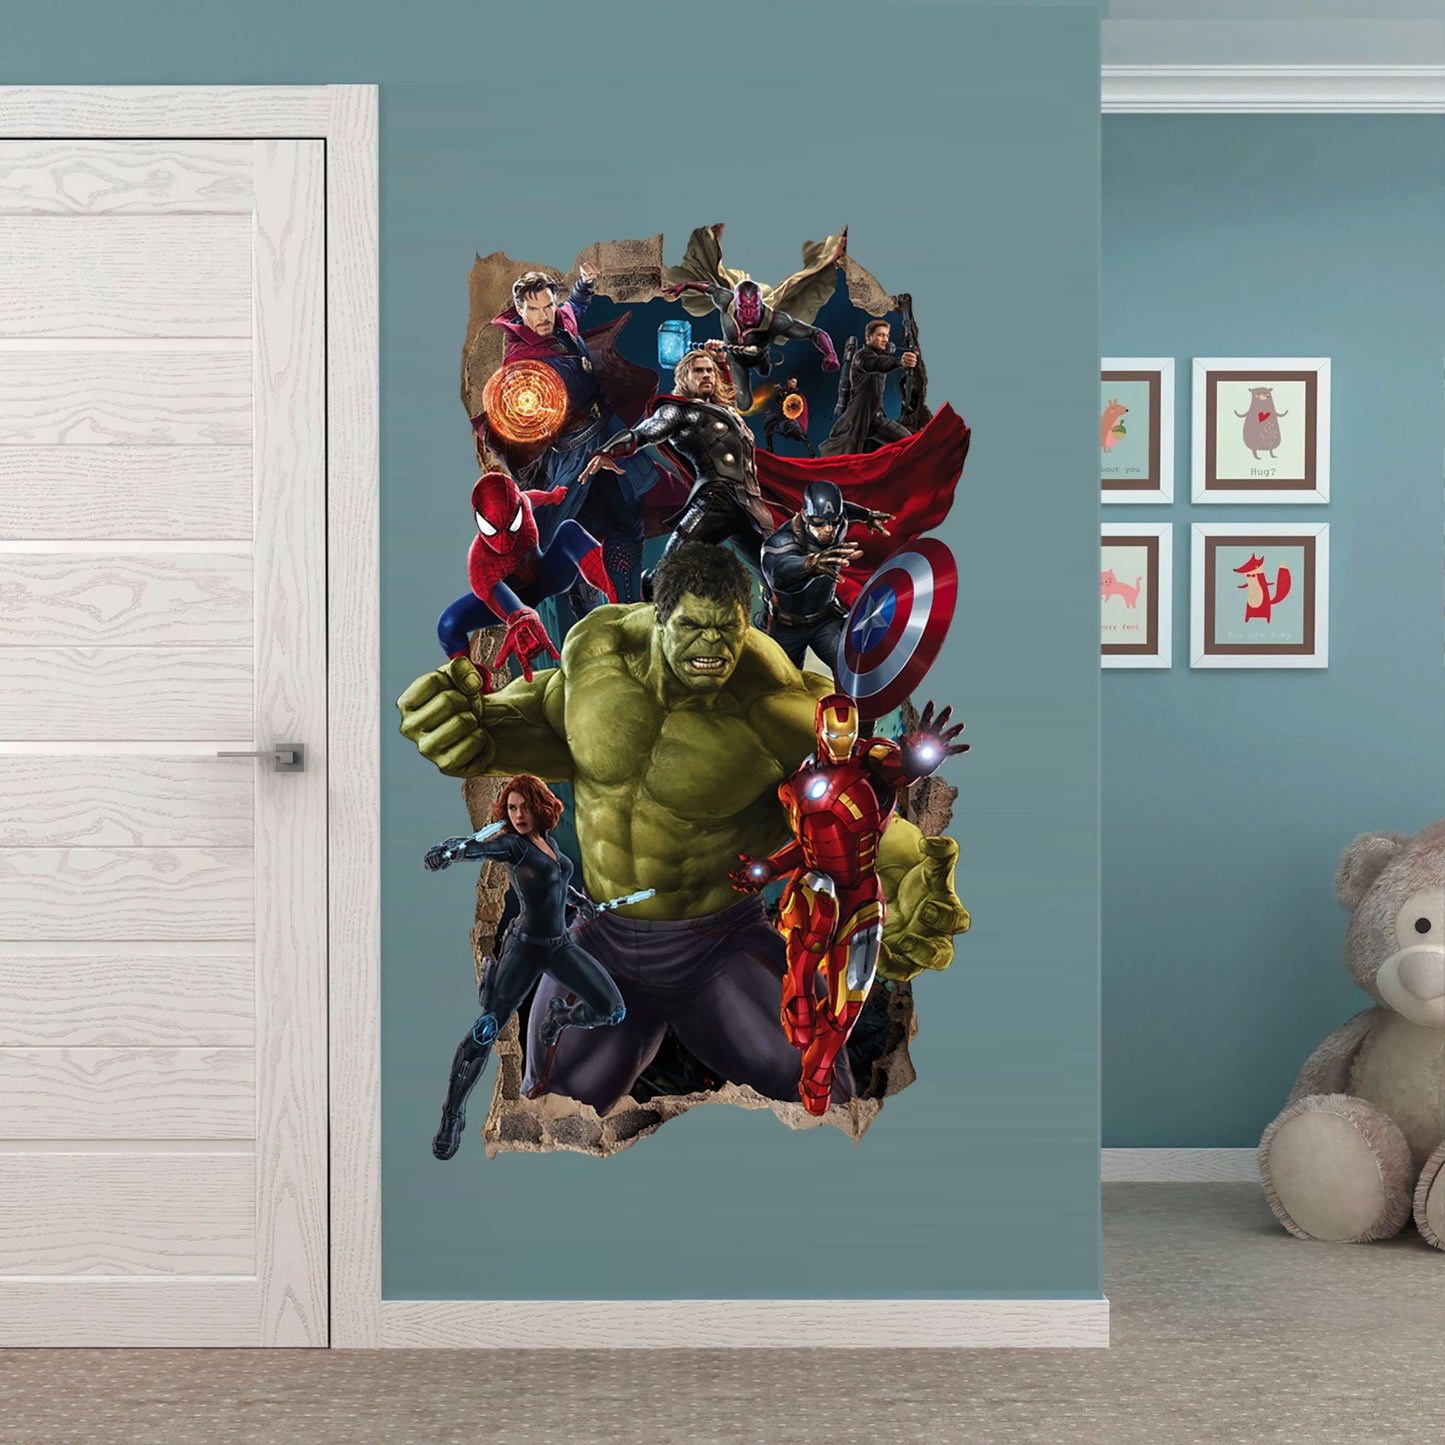 Marvel Superheros Breaking out from Smashed Vertical Wall Decal - Hulk Spiderman Captain America Avengers - BR338